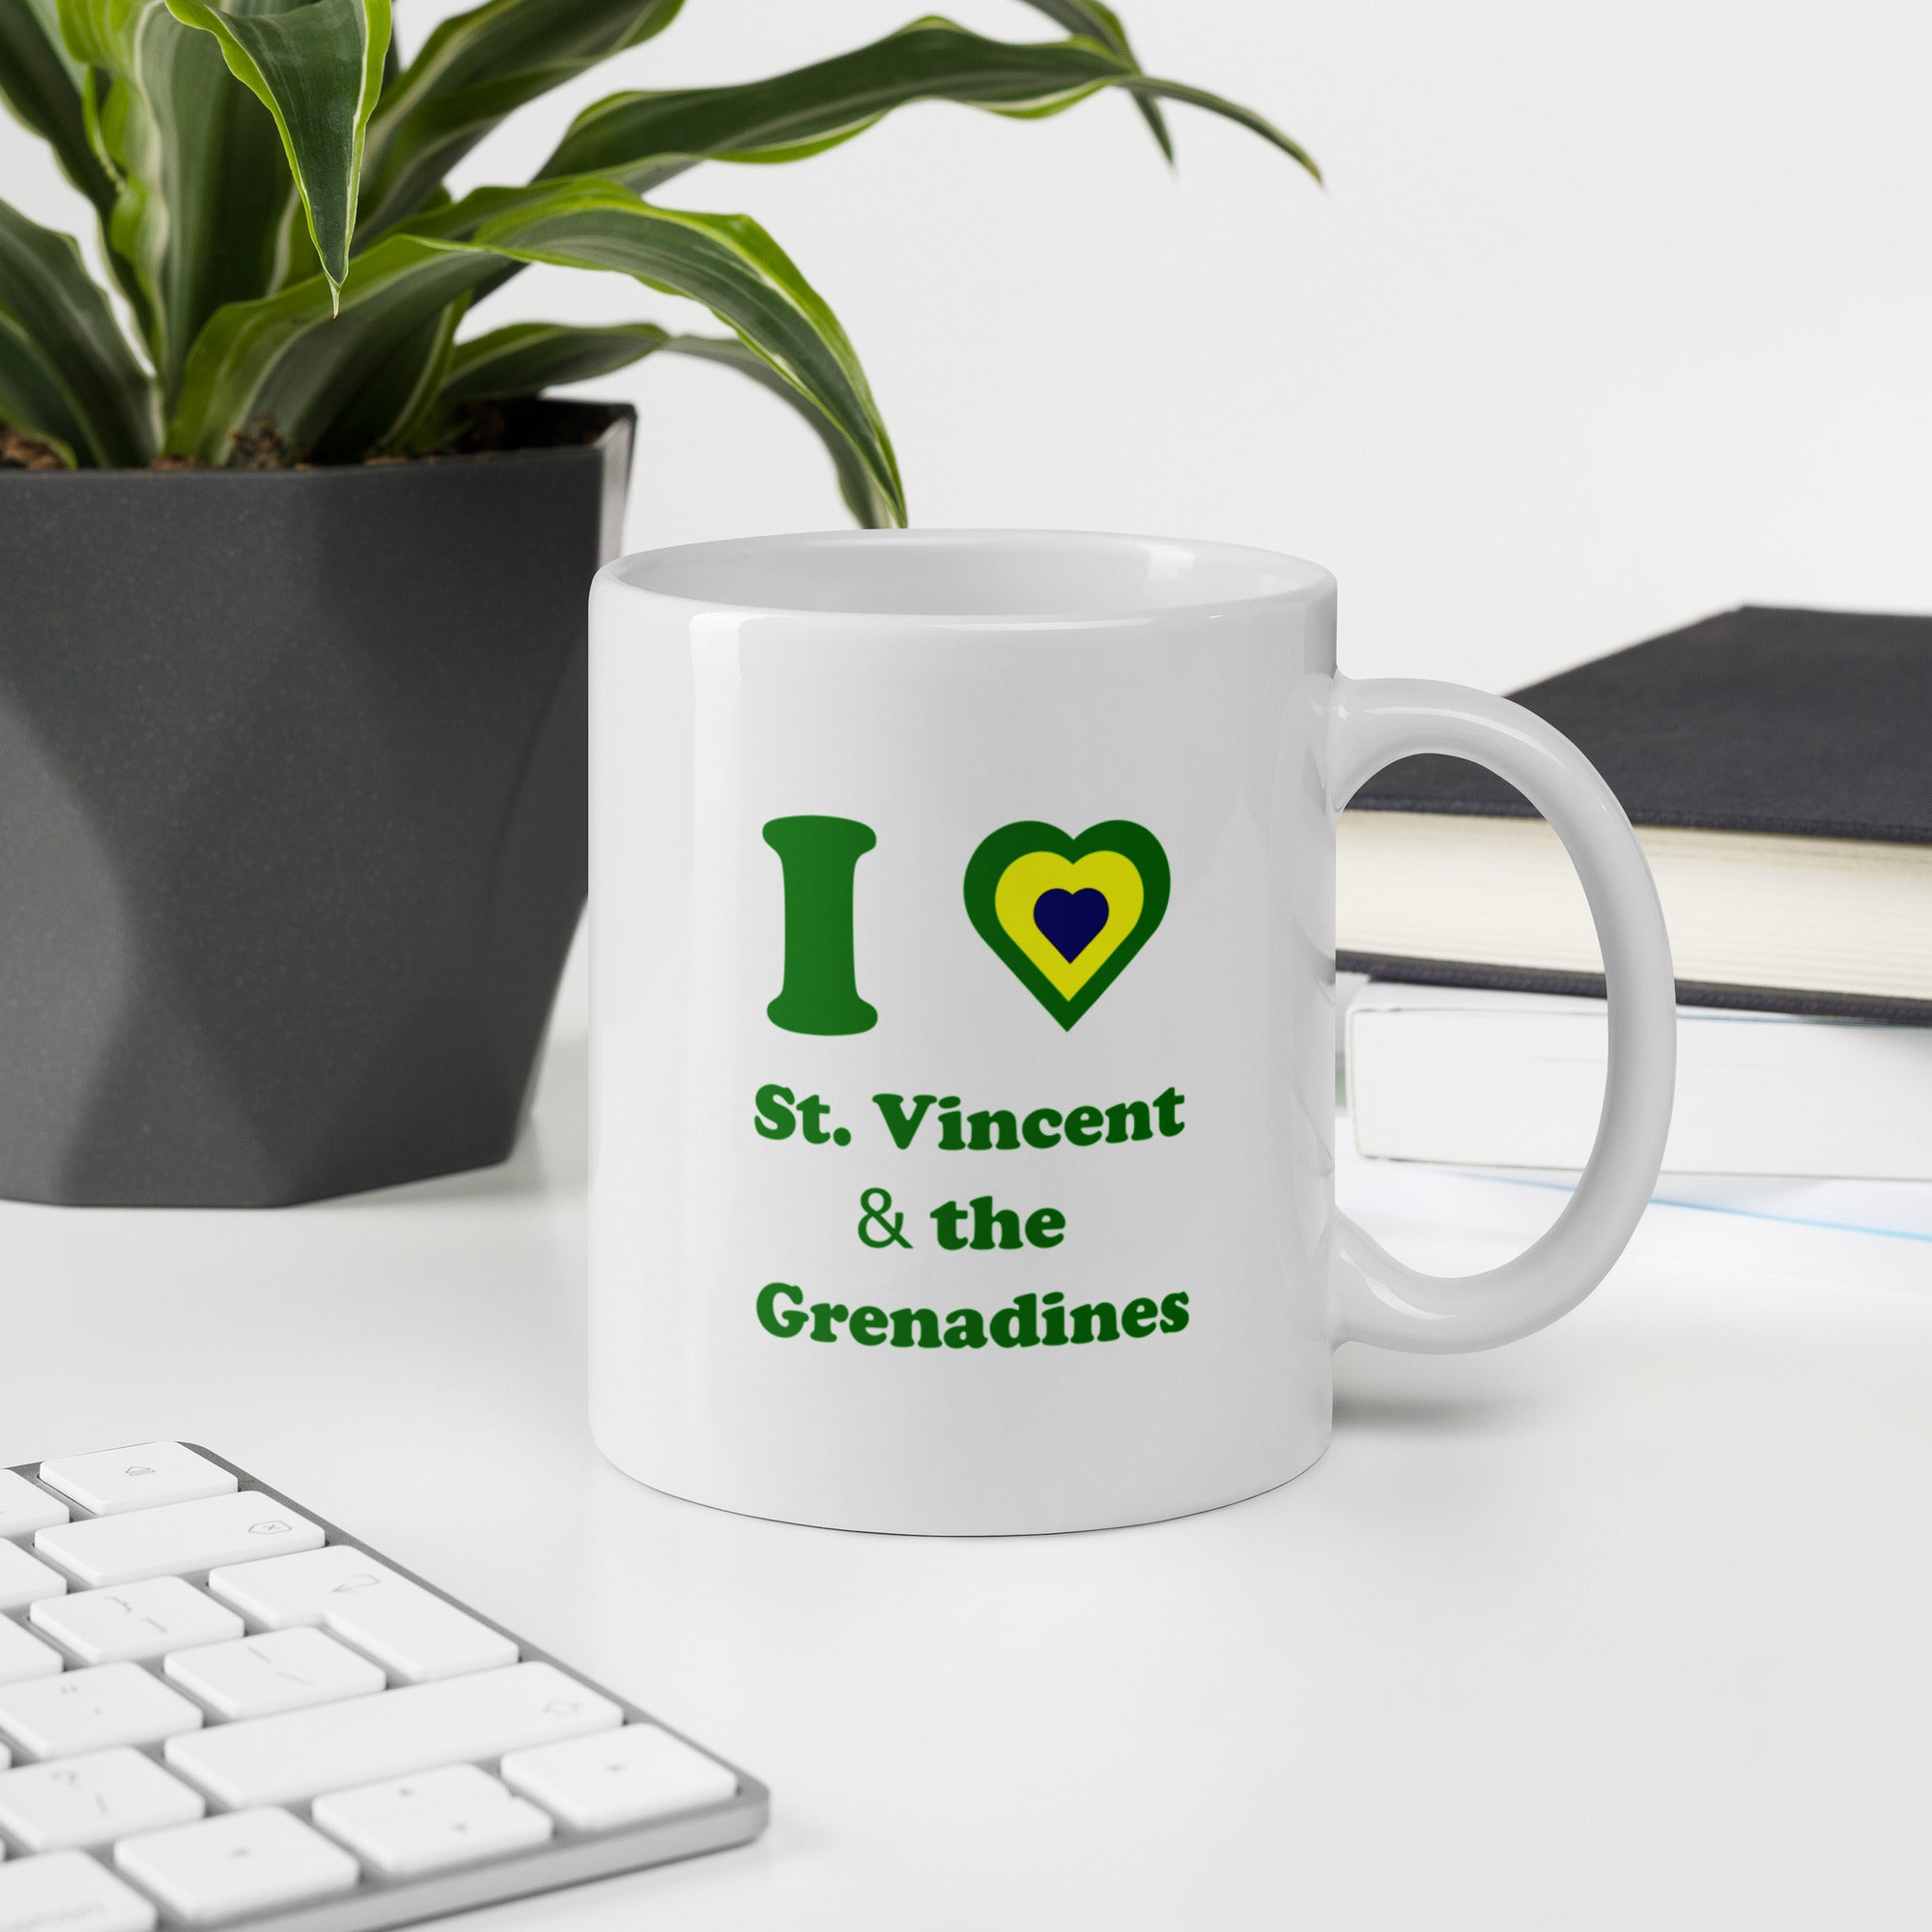 I love St. Vincent and the Grenadines 11oz coffee mug with green lettering and a national colored heart